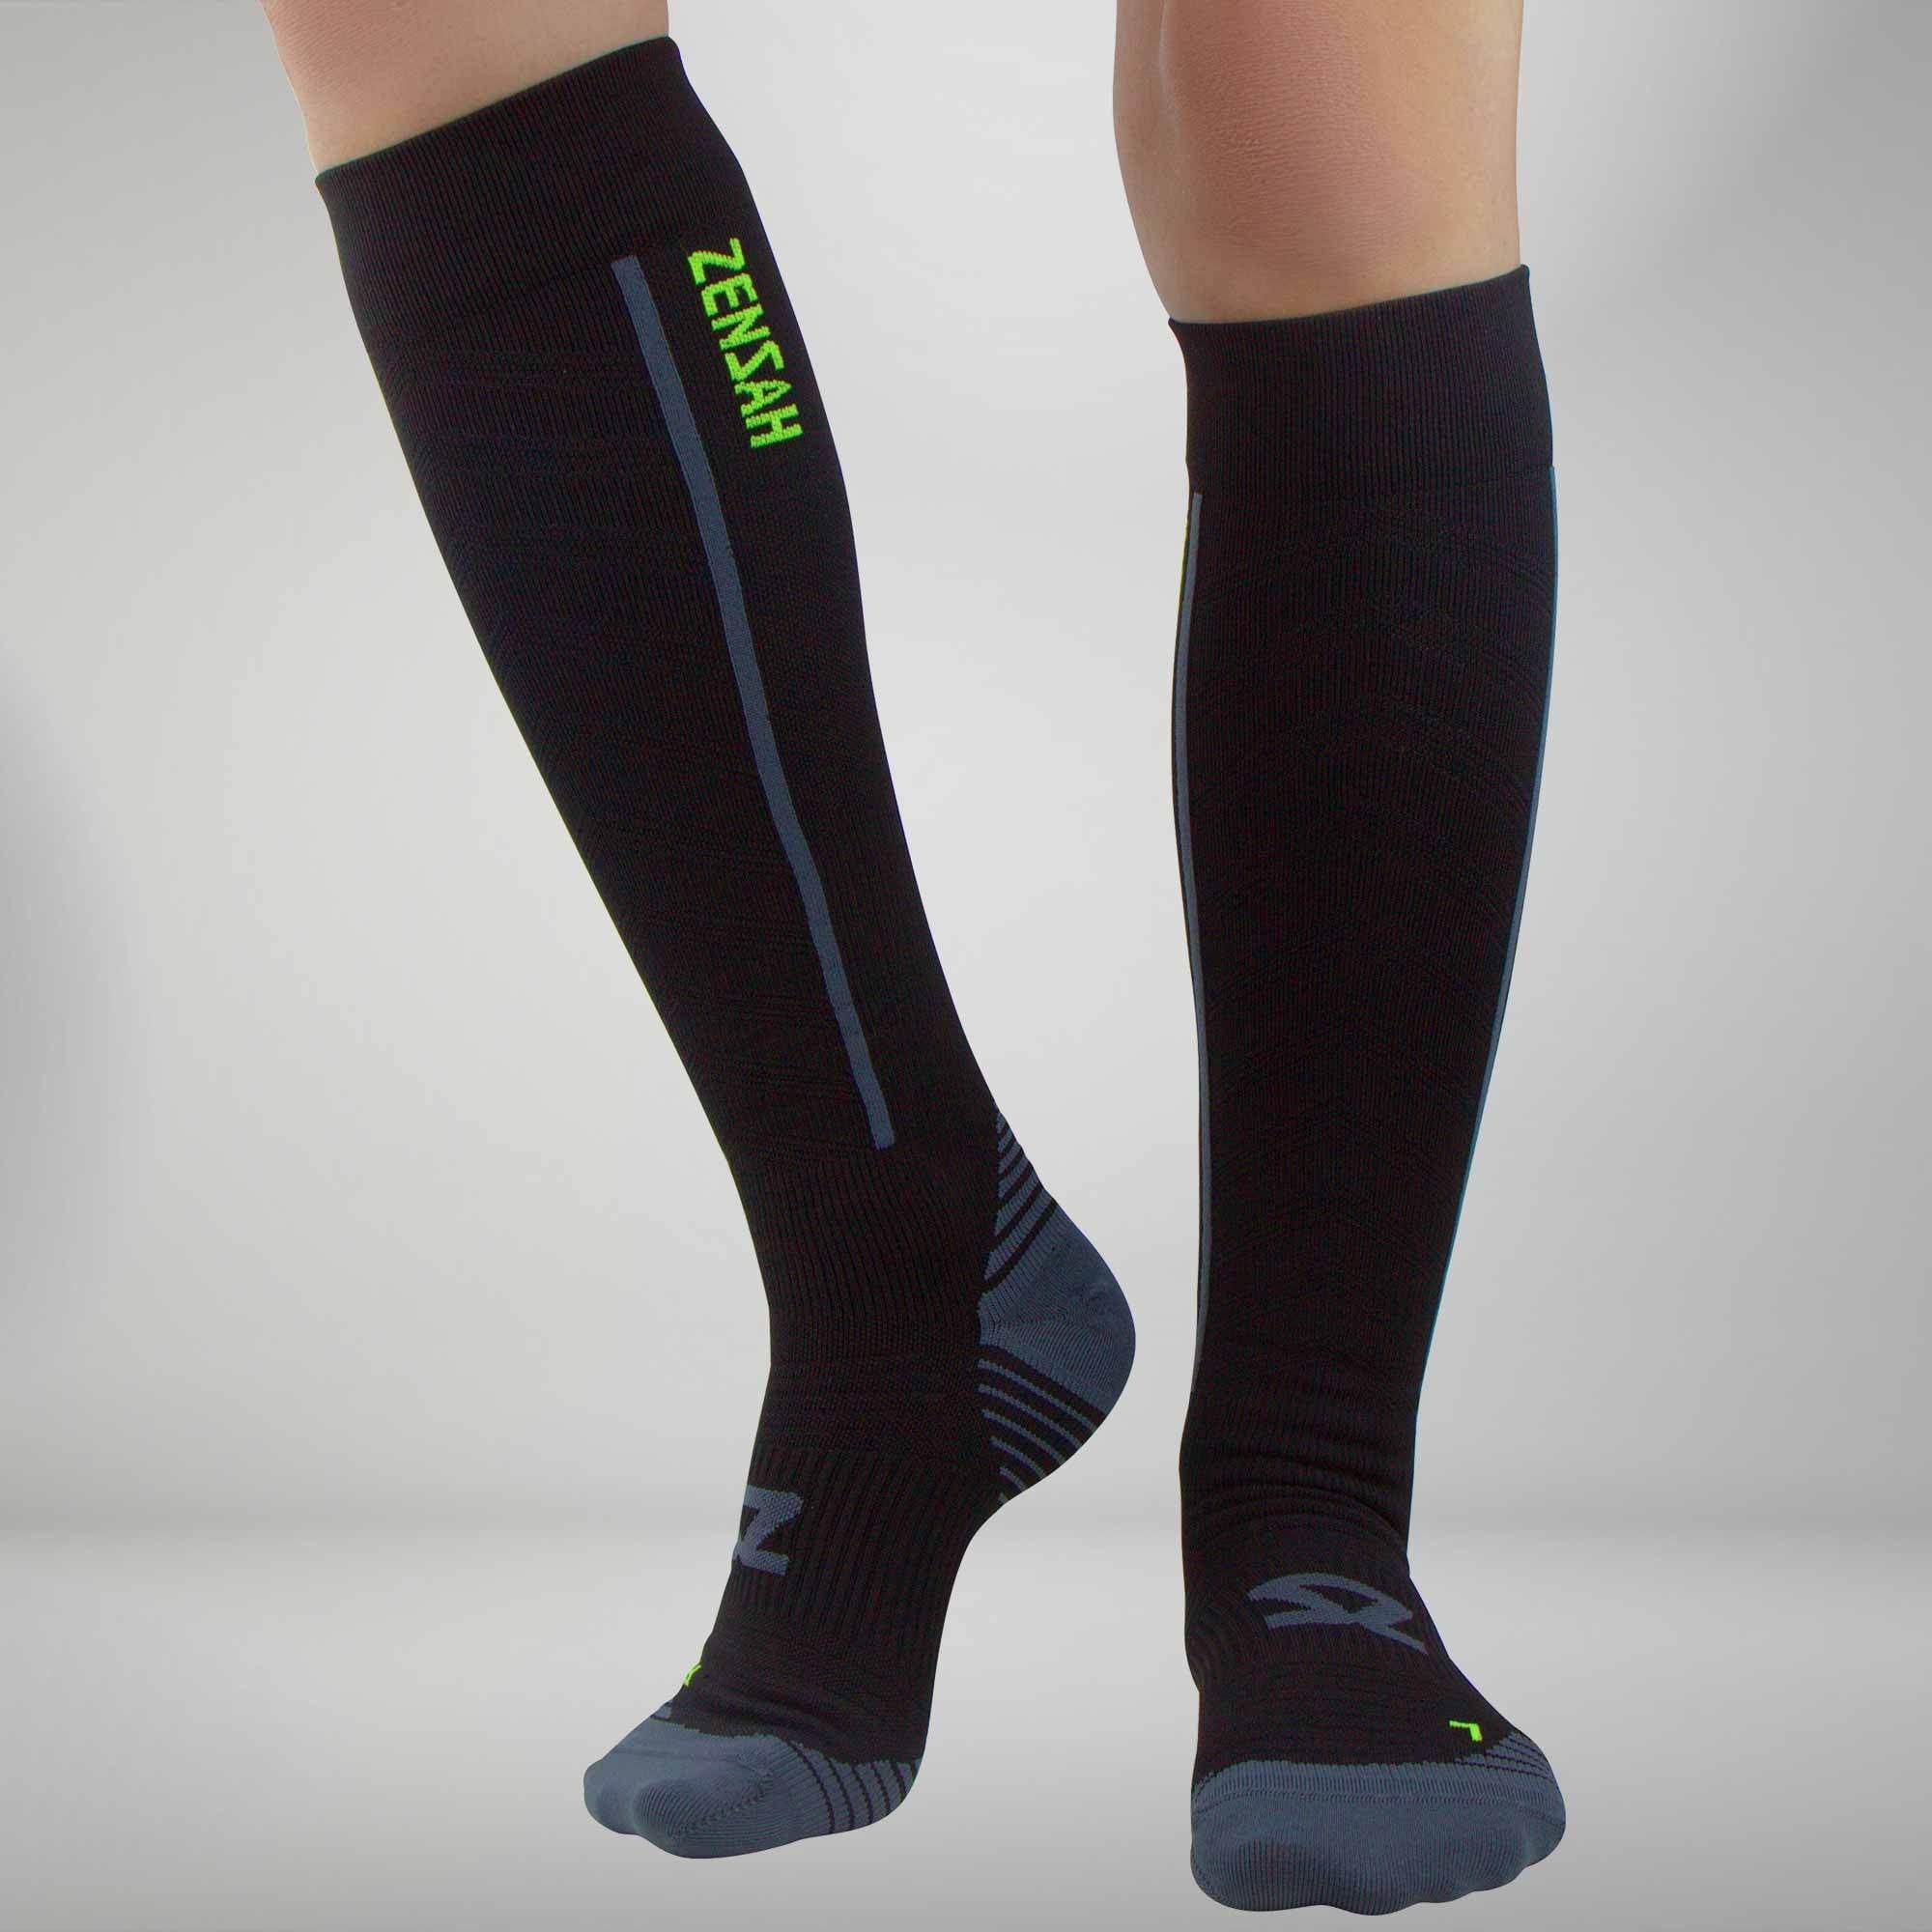 Zensah Featherweight Compression Socks - Quest Outdoors